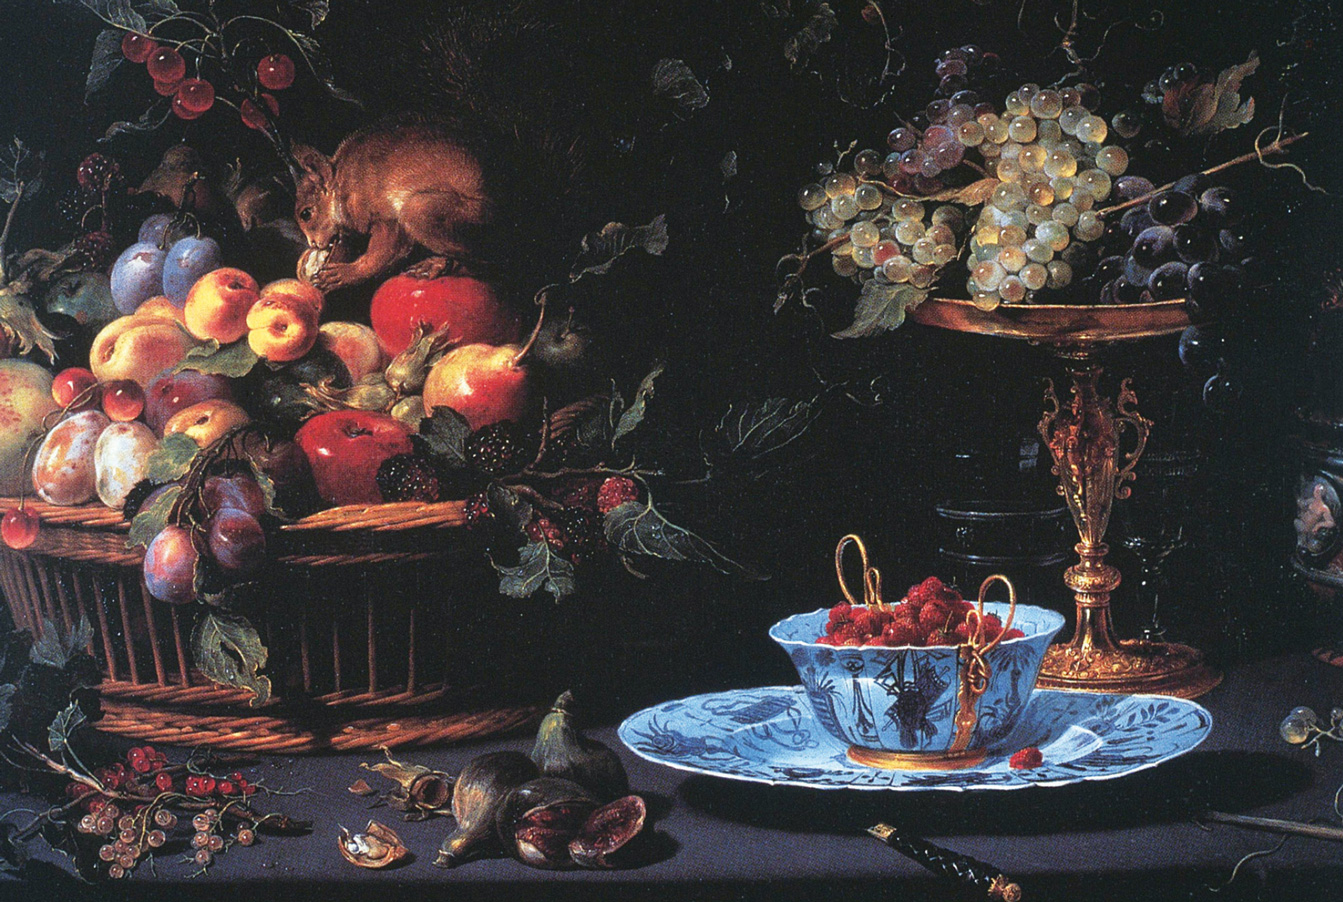 A fluffy guest. Frans Snyders’s 1616 Still Life with Fruit, Wan-Li Porcelain, and Squirrel. Courtesy Museum of Fine Arts, Boston.